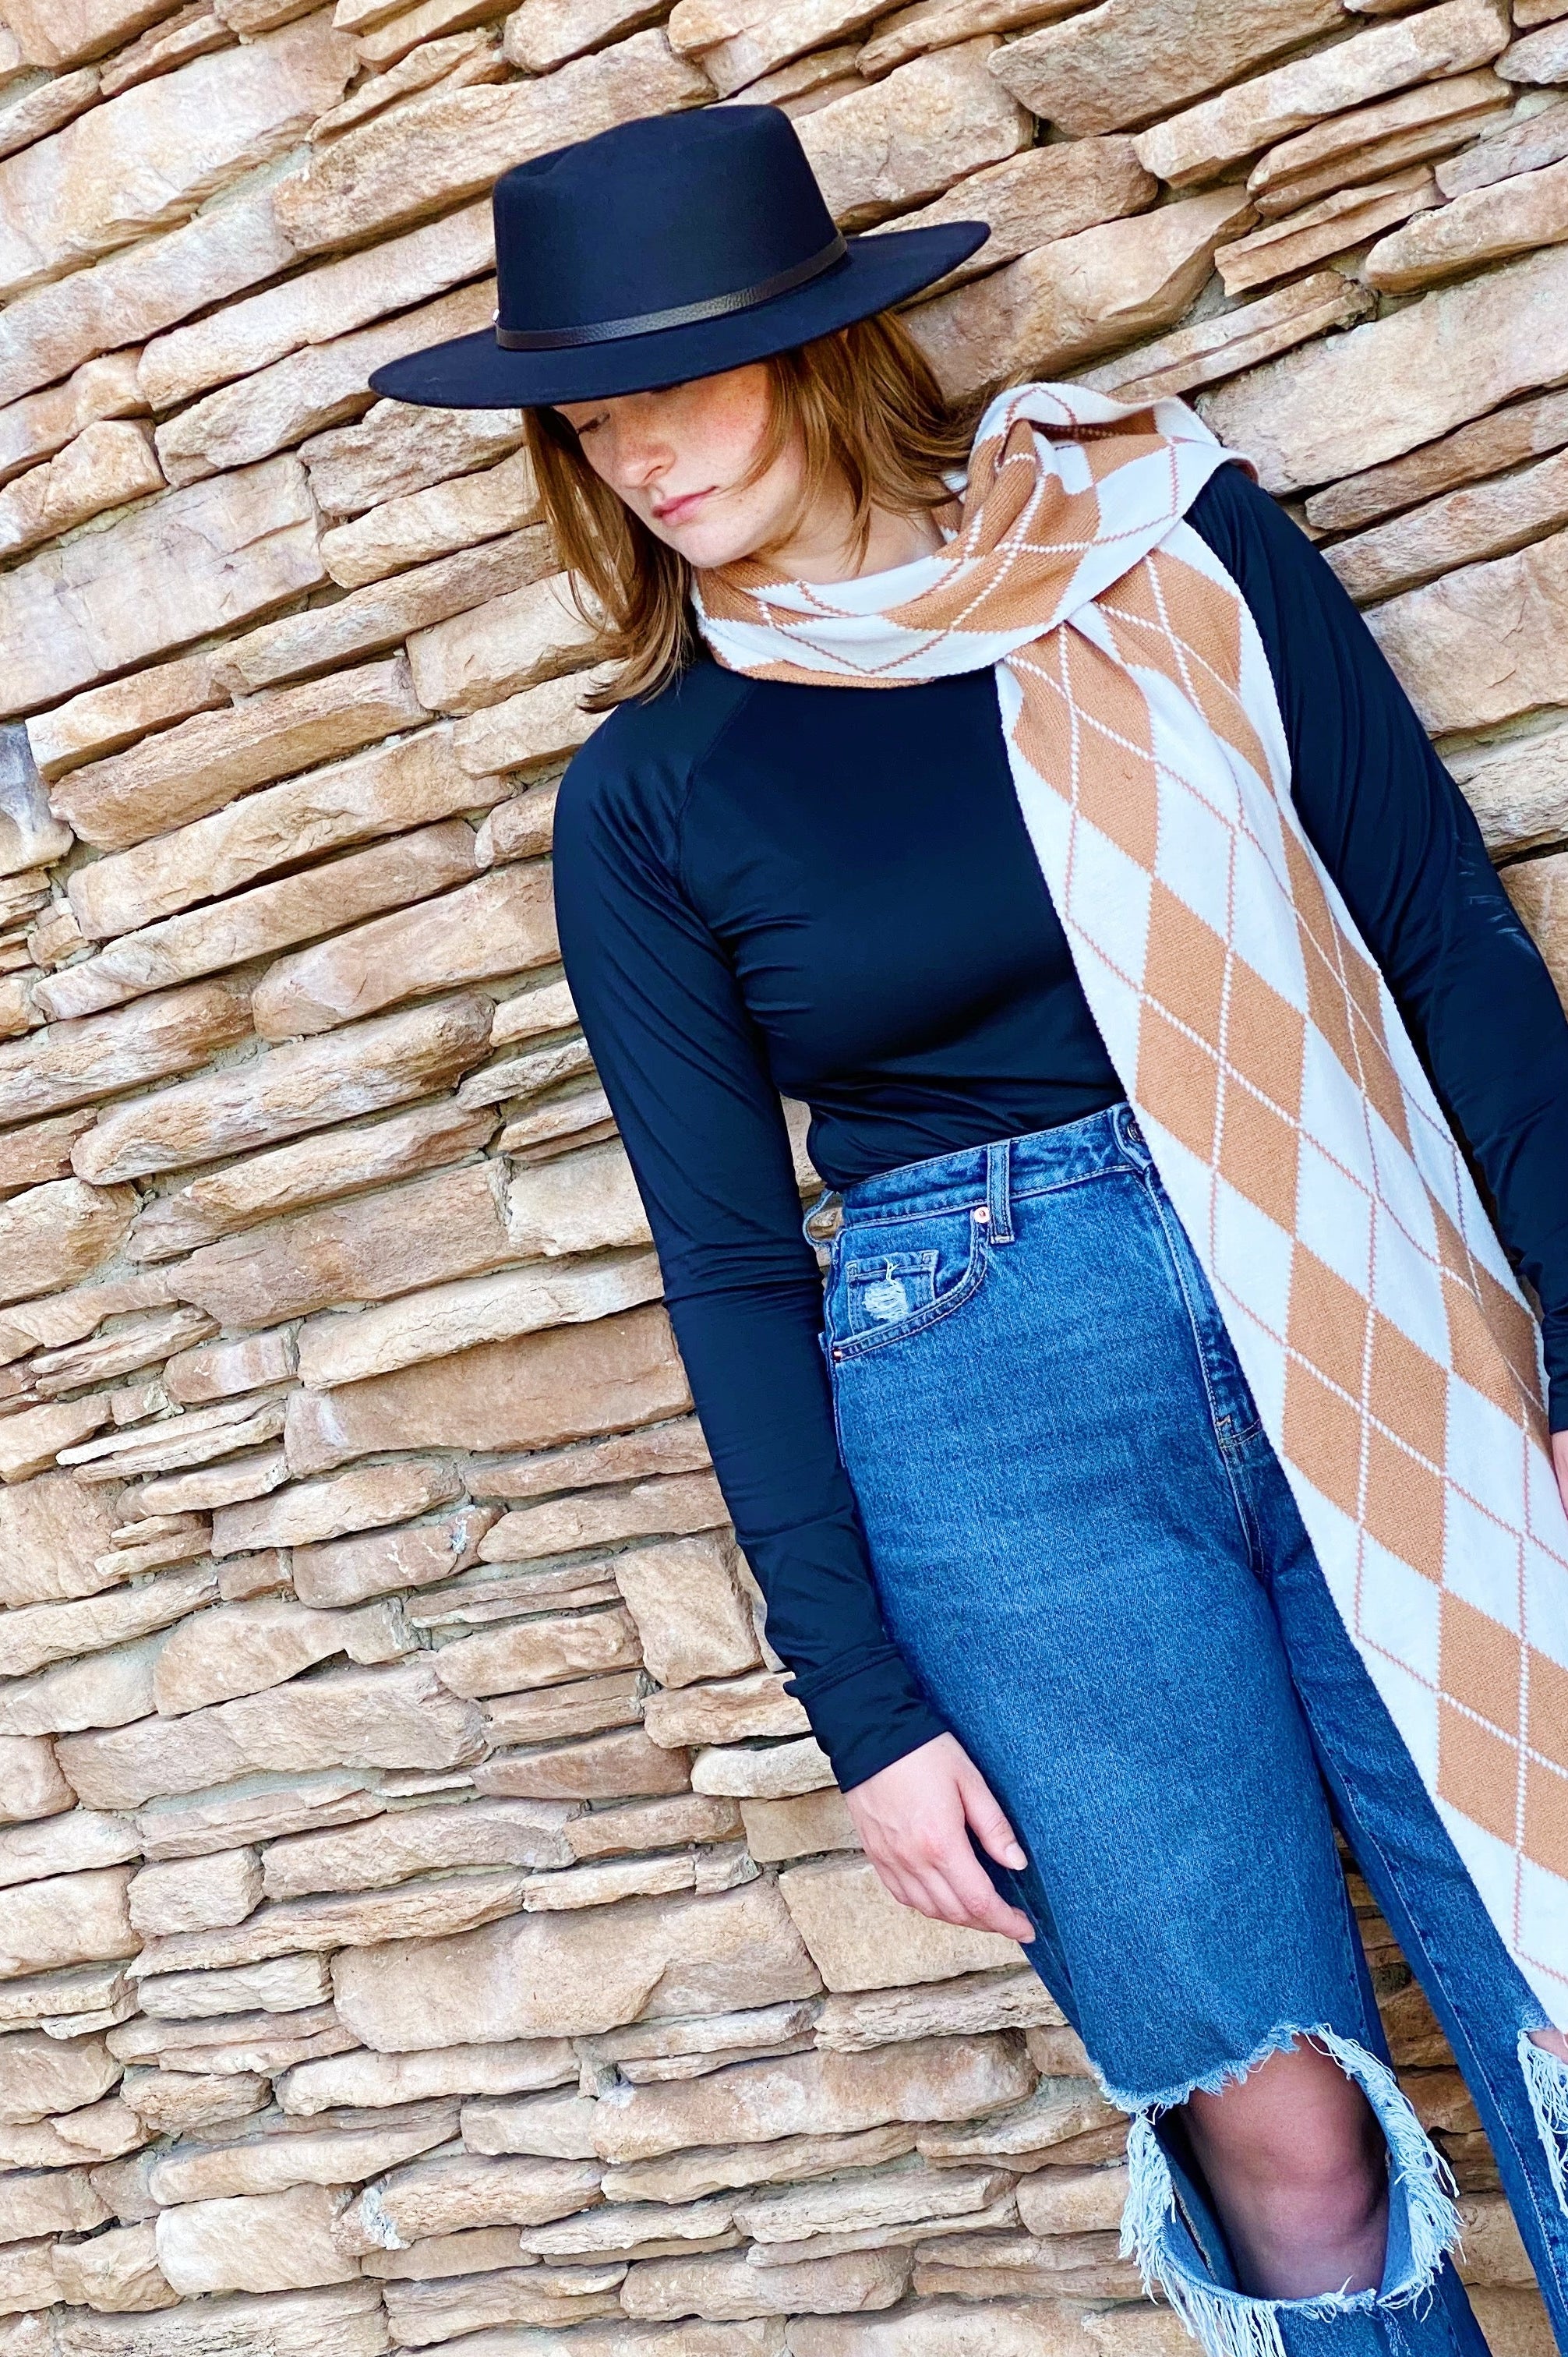 Our Gal Patterned Knit Scarf Ellisonyoung.com